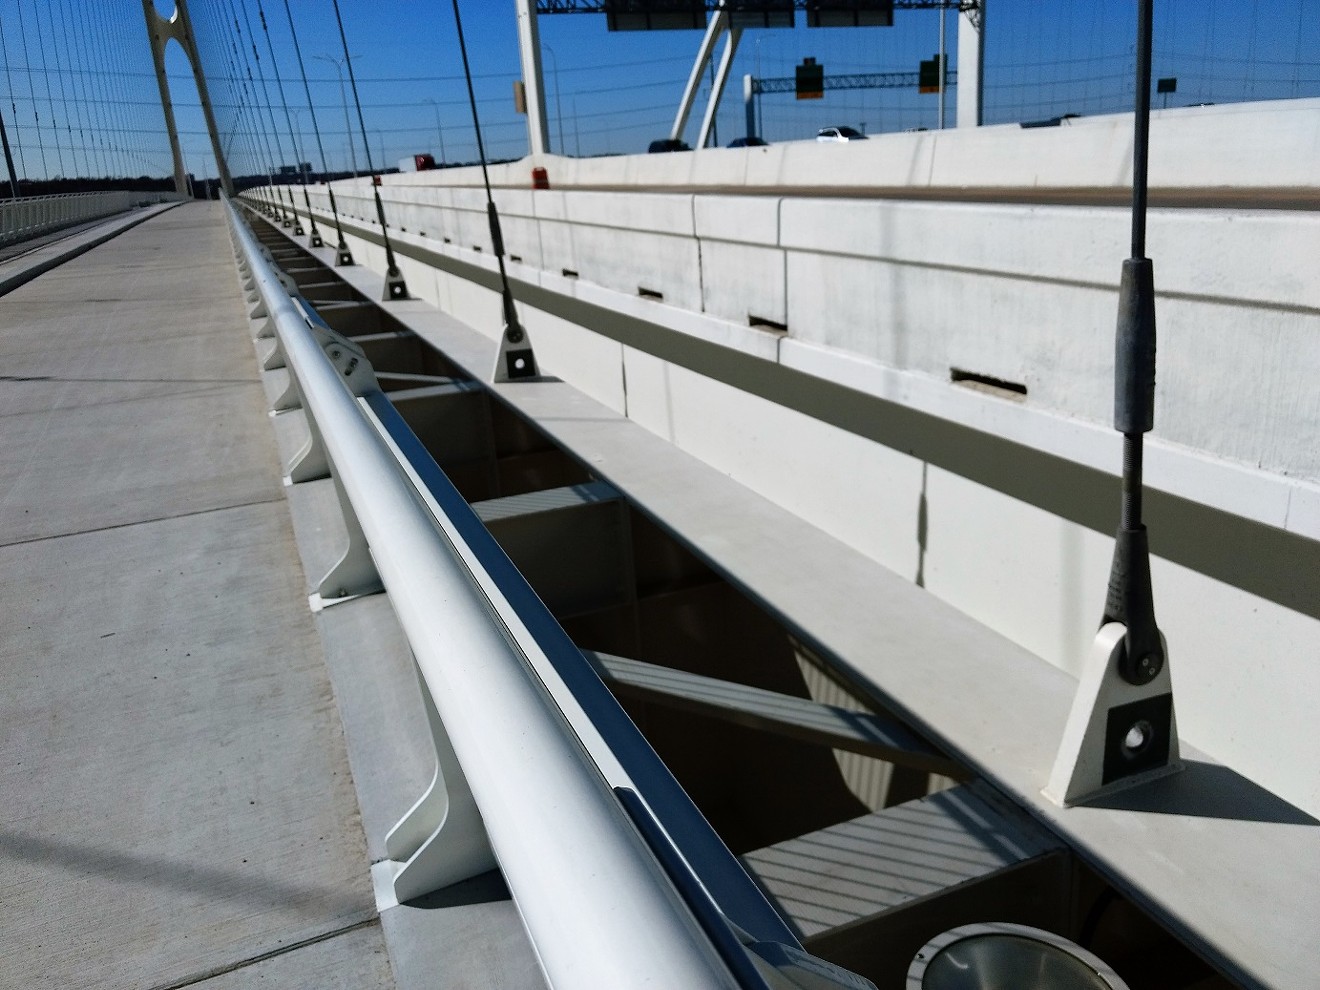 Rods that connect long steel cables to the concrete decks of the hike and bike paths on both Calatrava bridges at Interstate 30 in downtown Dallas have snapped in high winds.